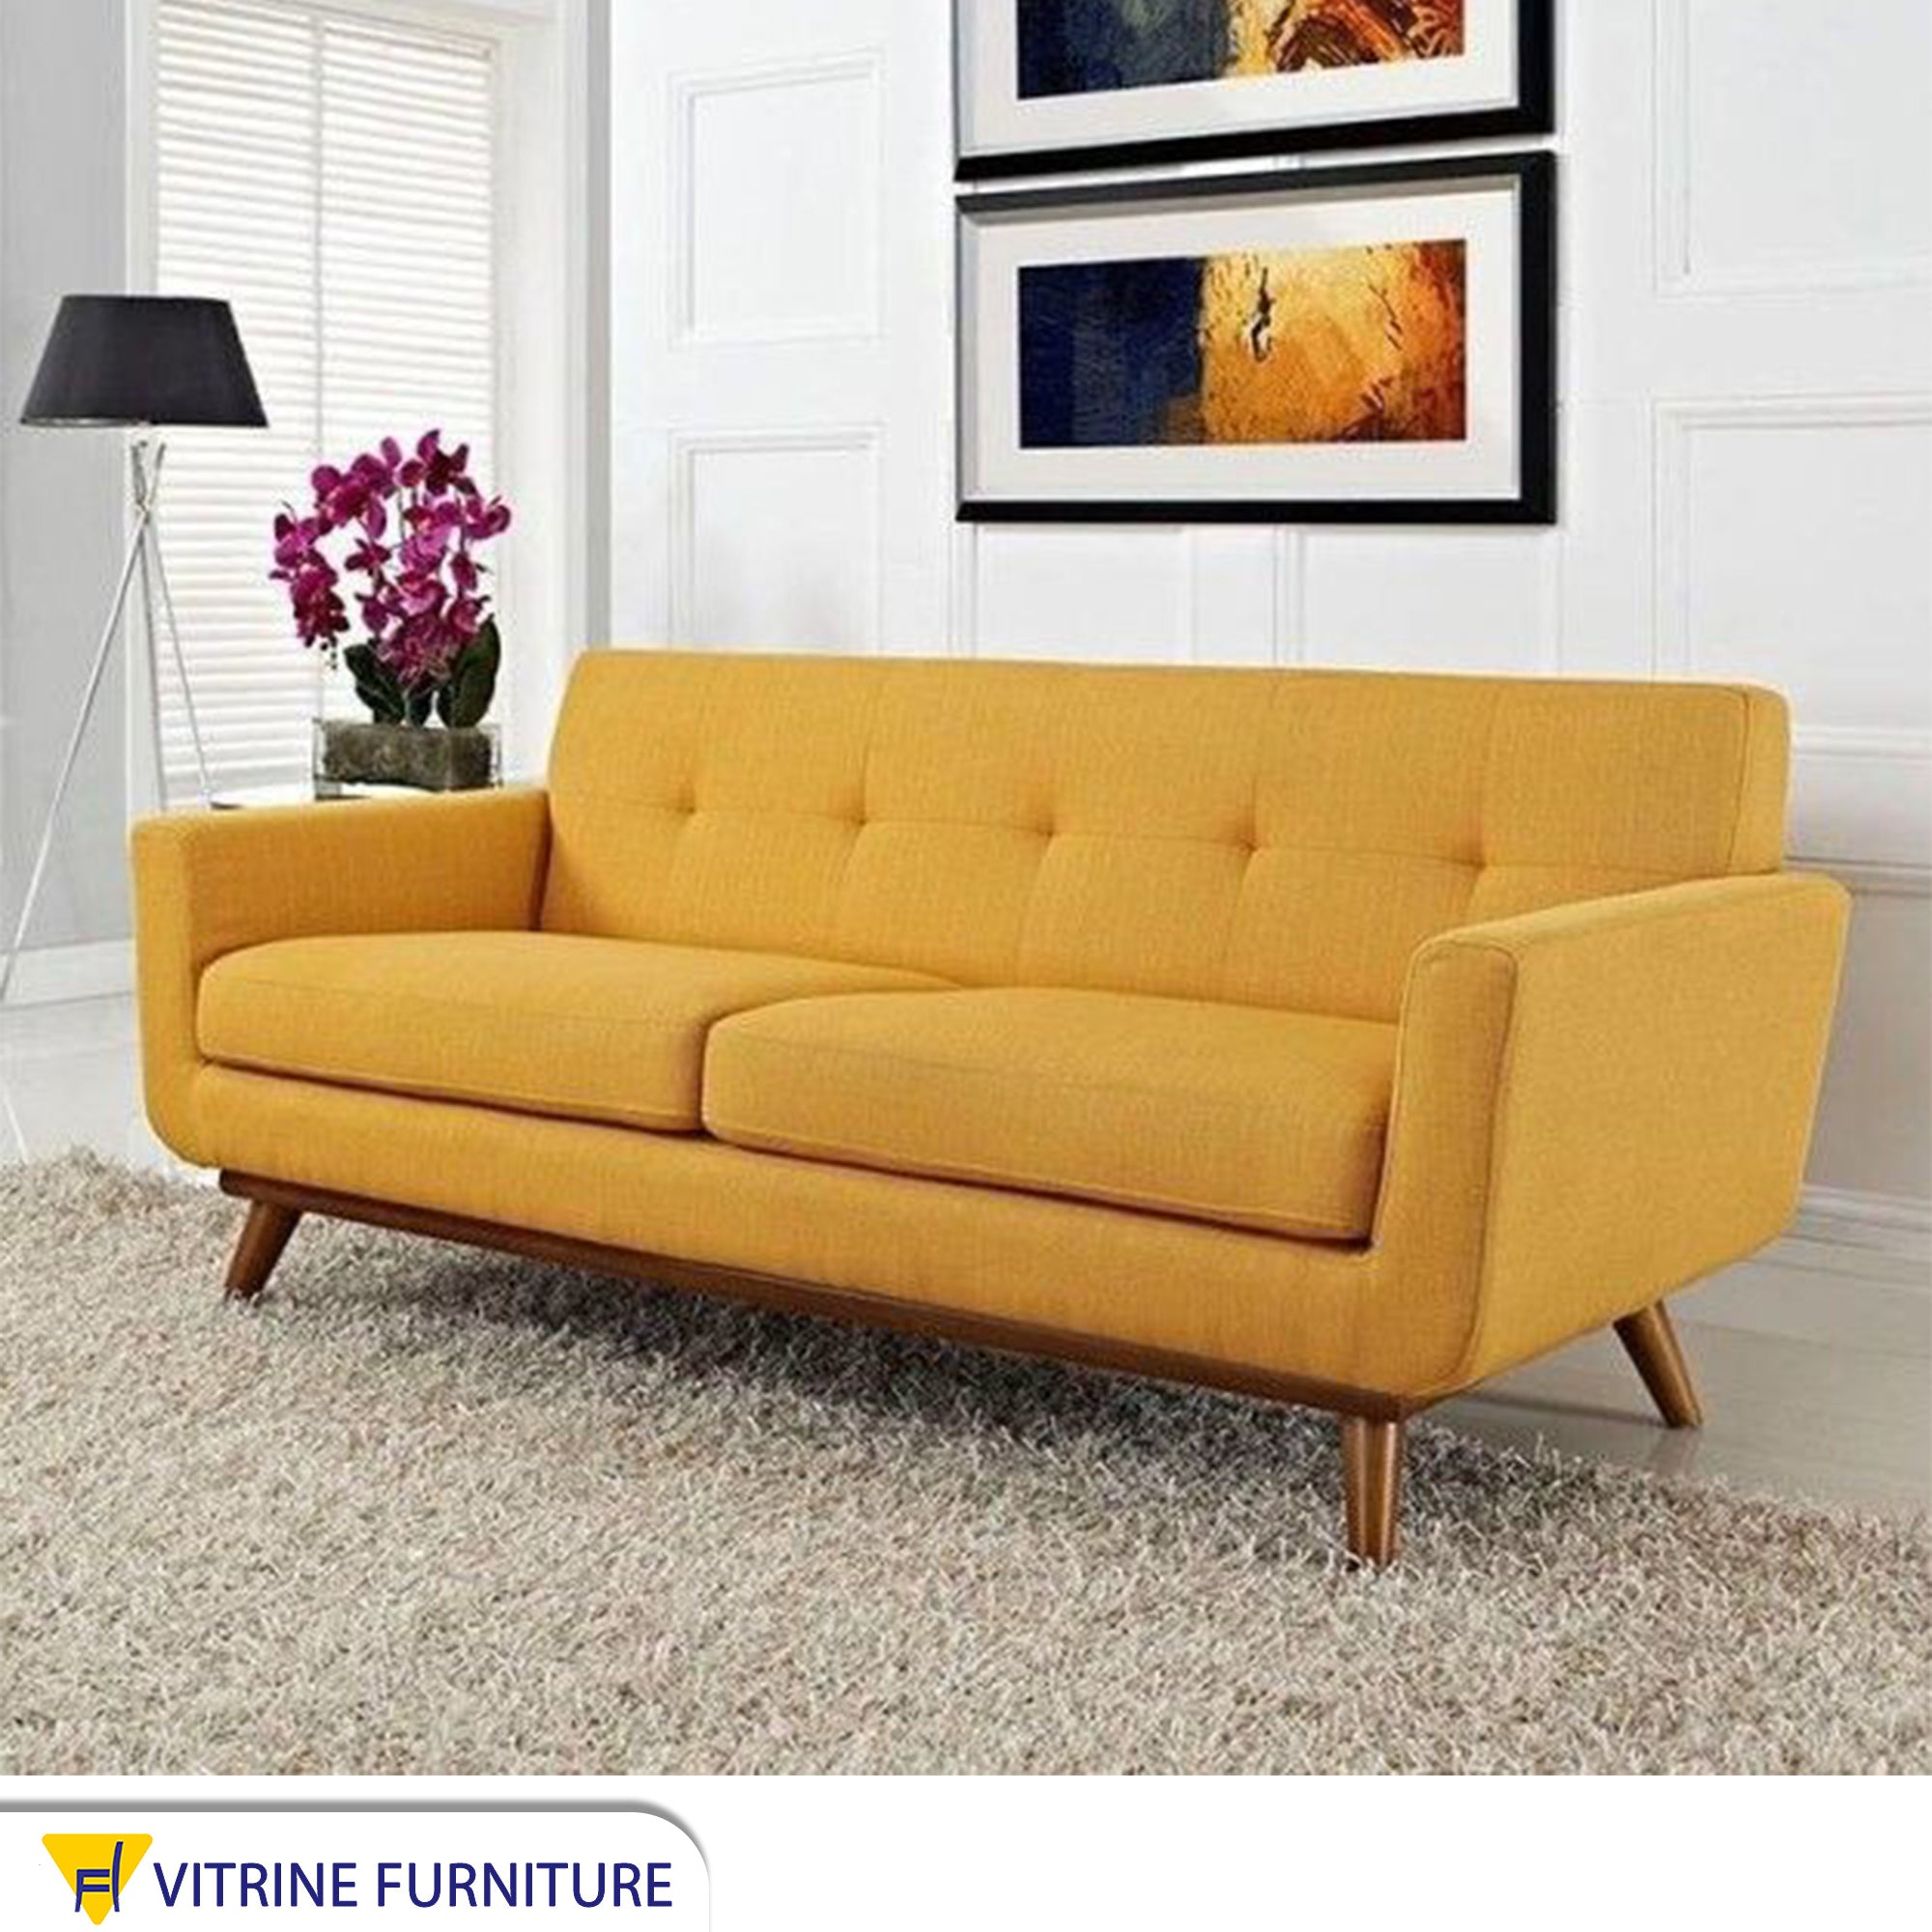 Camel yellow sofa with slanted legs